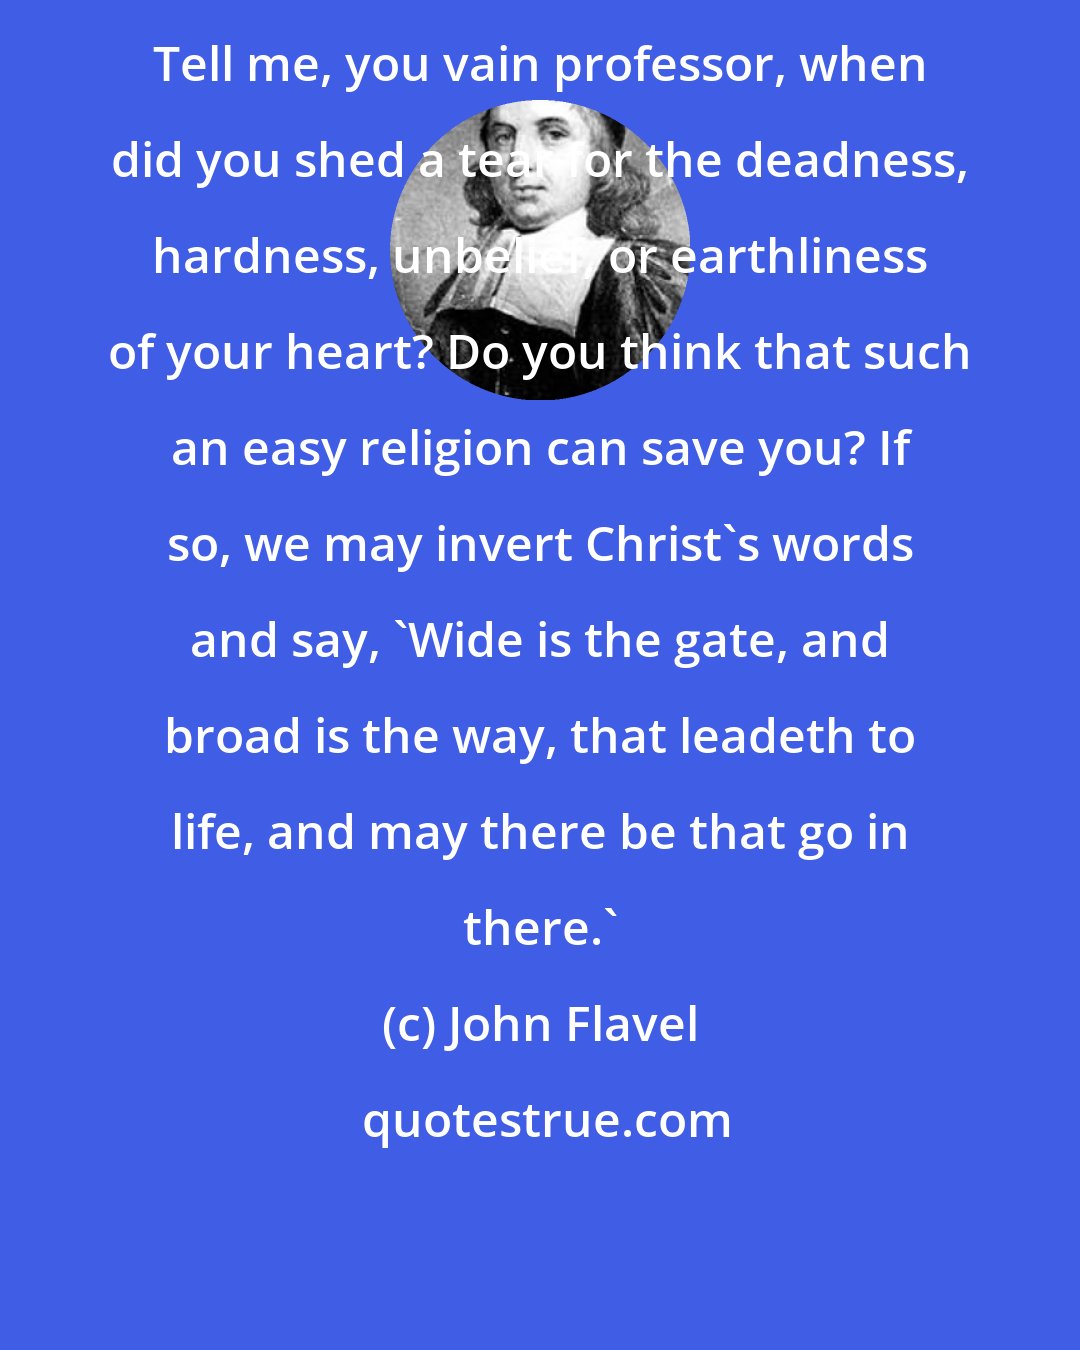 John Flavel: Tell me, you vain professor, when did you shed a tear for the deadness, hardness, unbelief, or earthliness of your heart? Do you think that such an easy religion can save you? If so, we may invert Christ's words and say, 'Wide is the gate, and broad is the way, that leadeth to life, and may there be that go in there.'